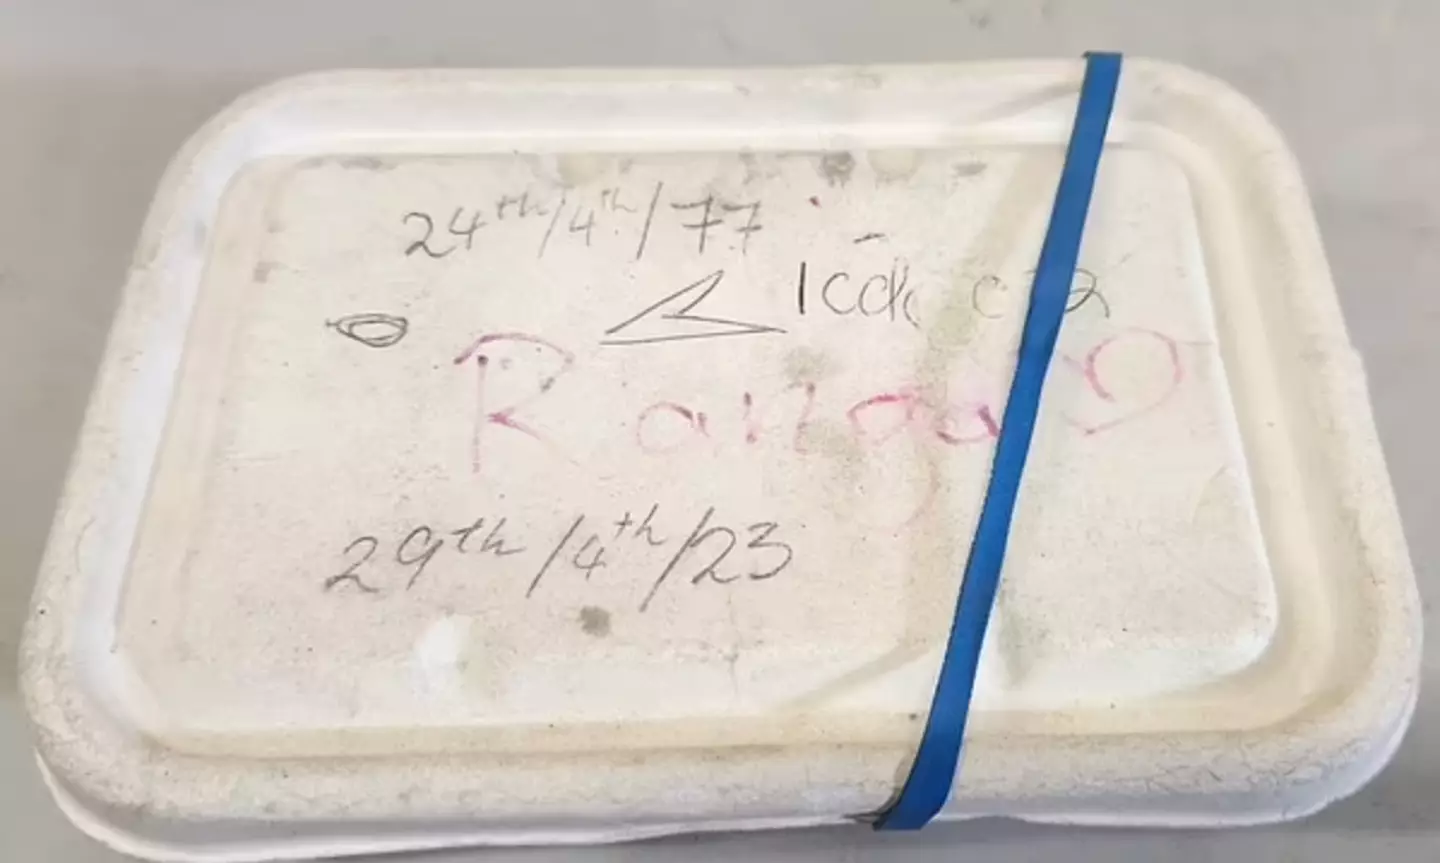 Police shared a photo of the container of ashes. (Rockingham Police)